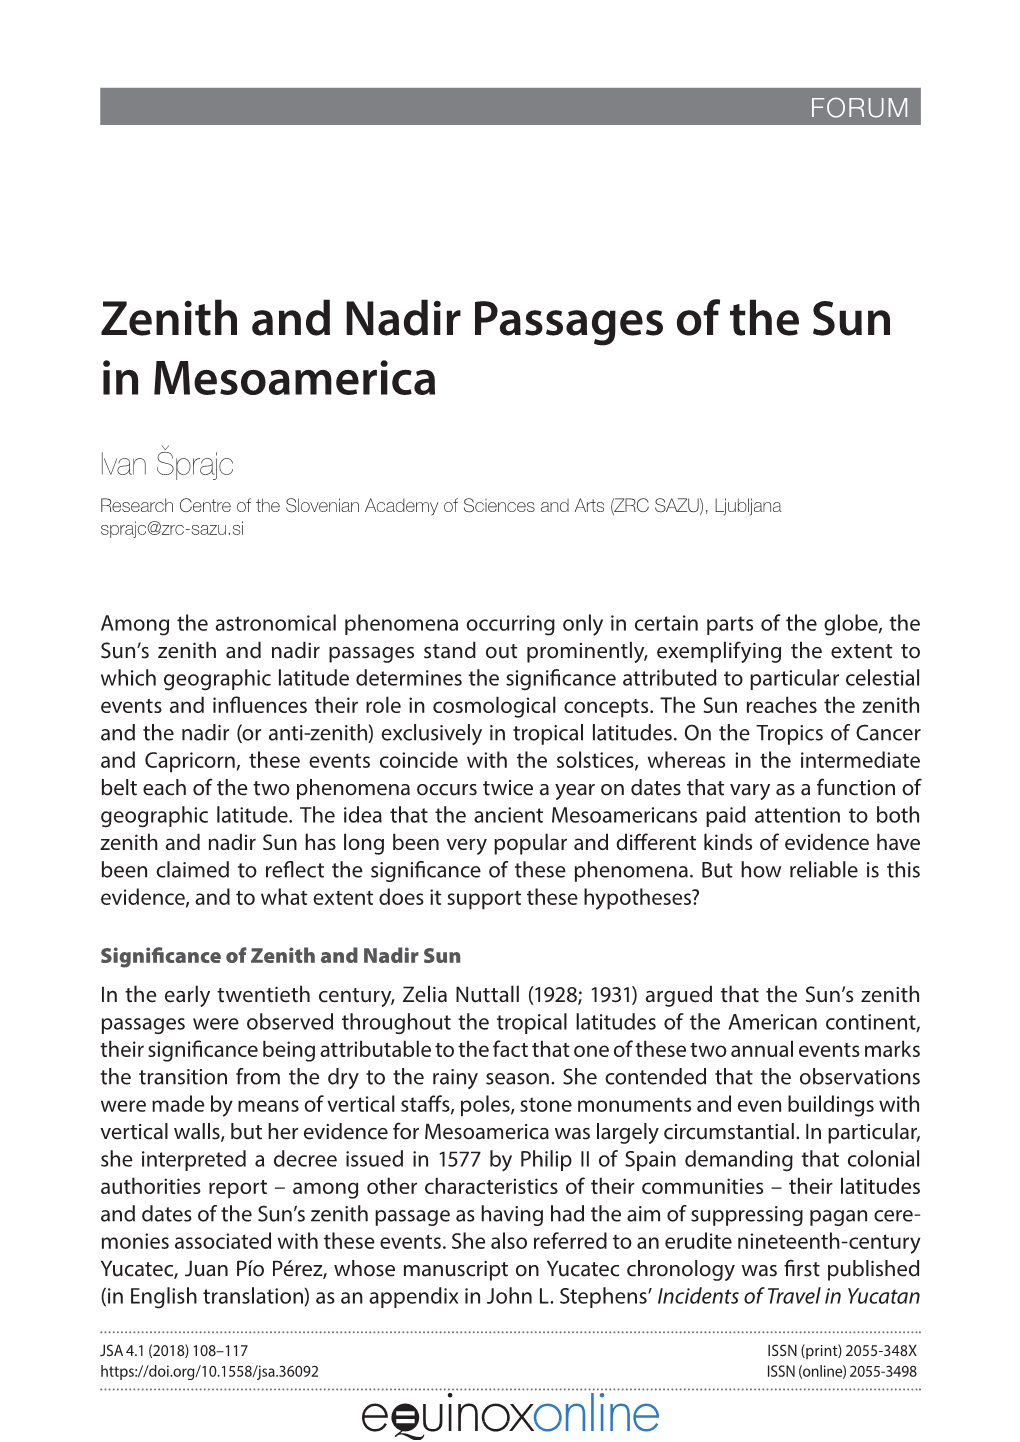 Zenith and Nadir Passages of the Sun in Mesoamerica